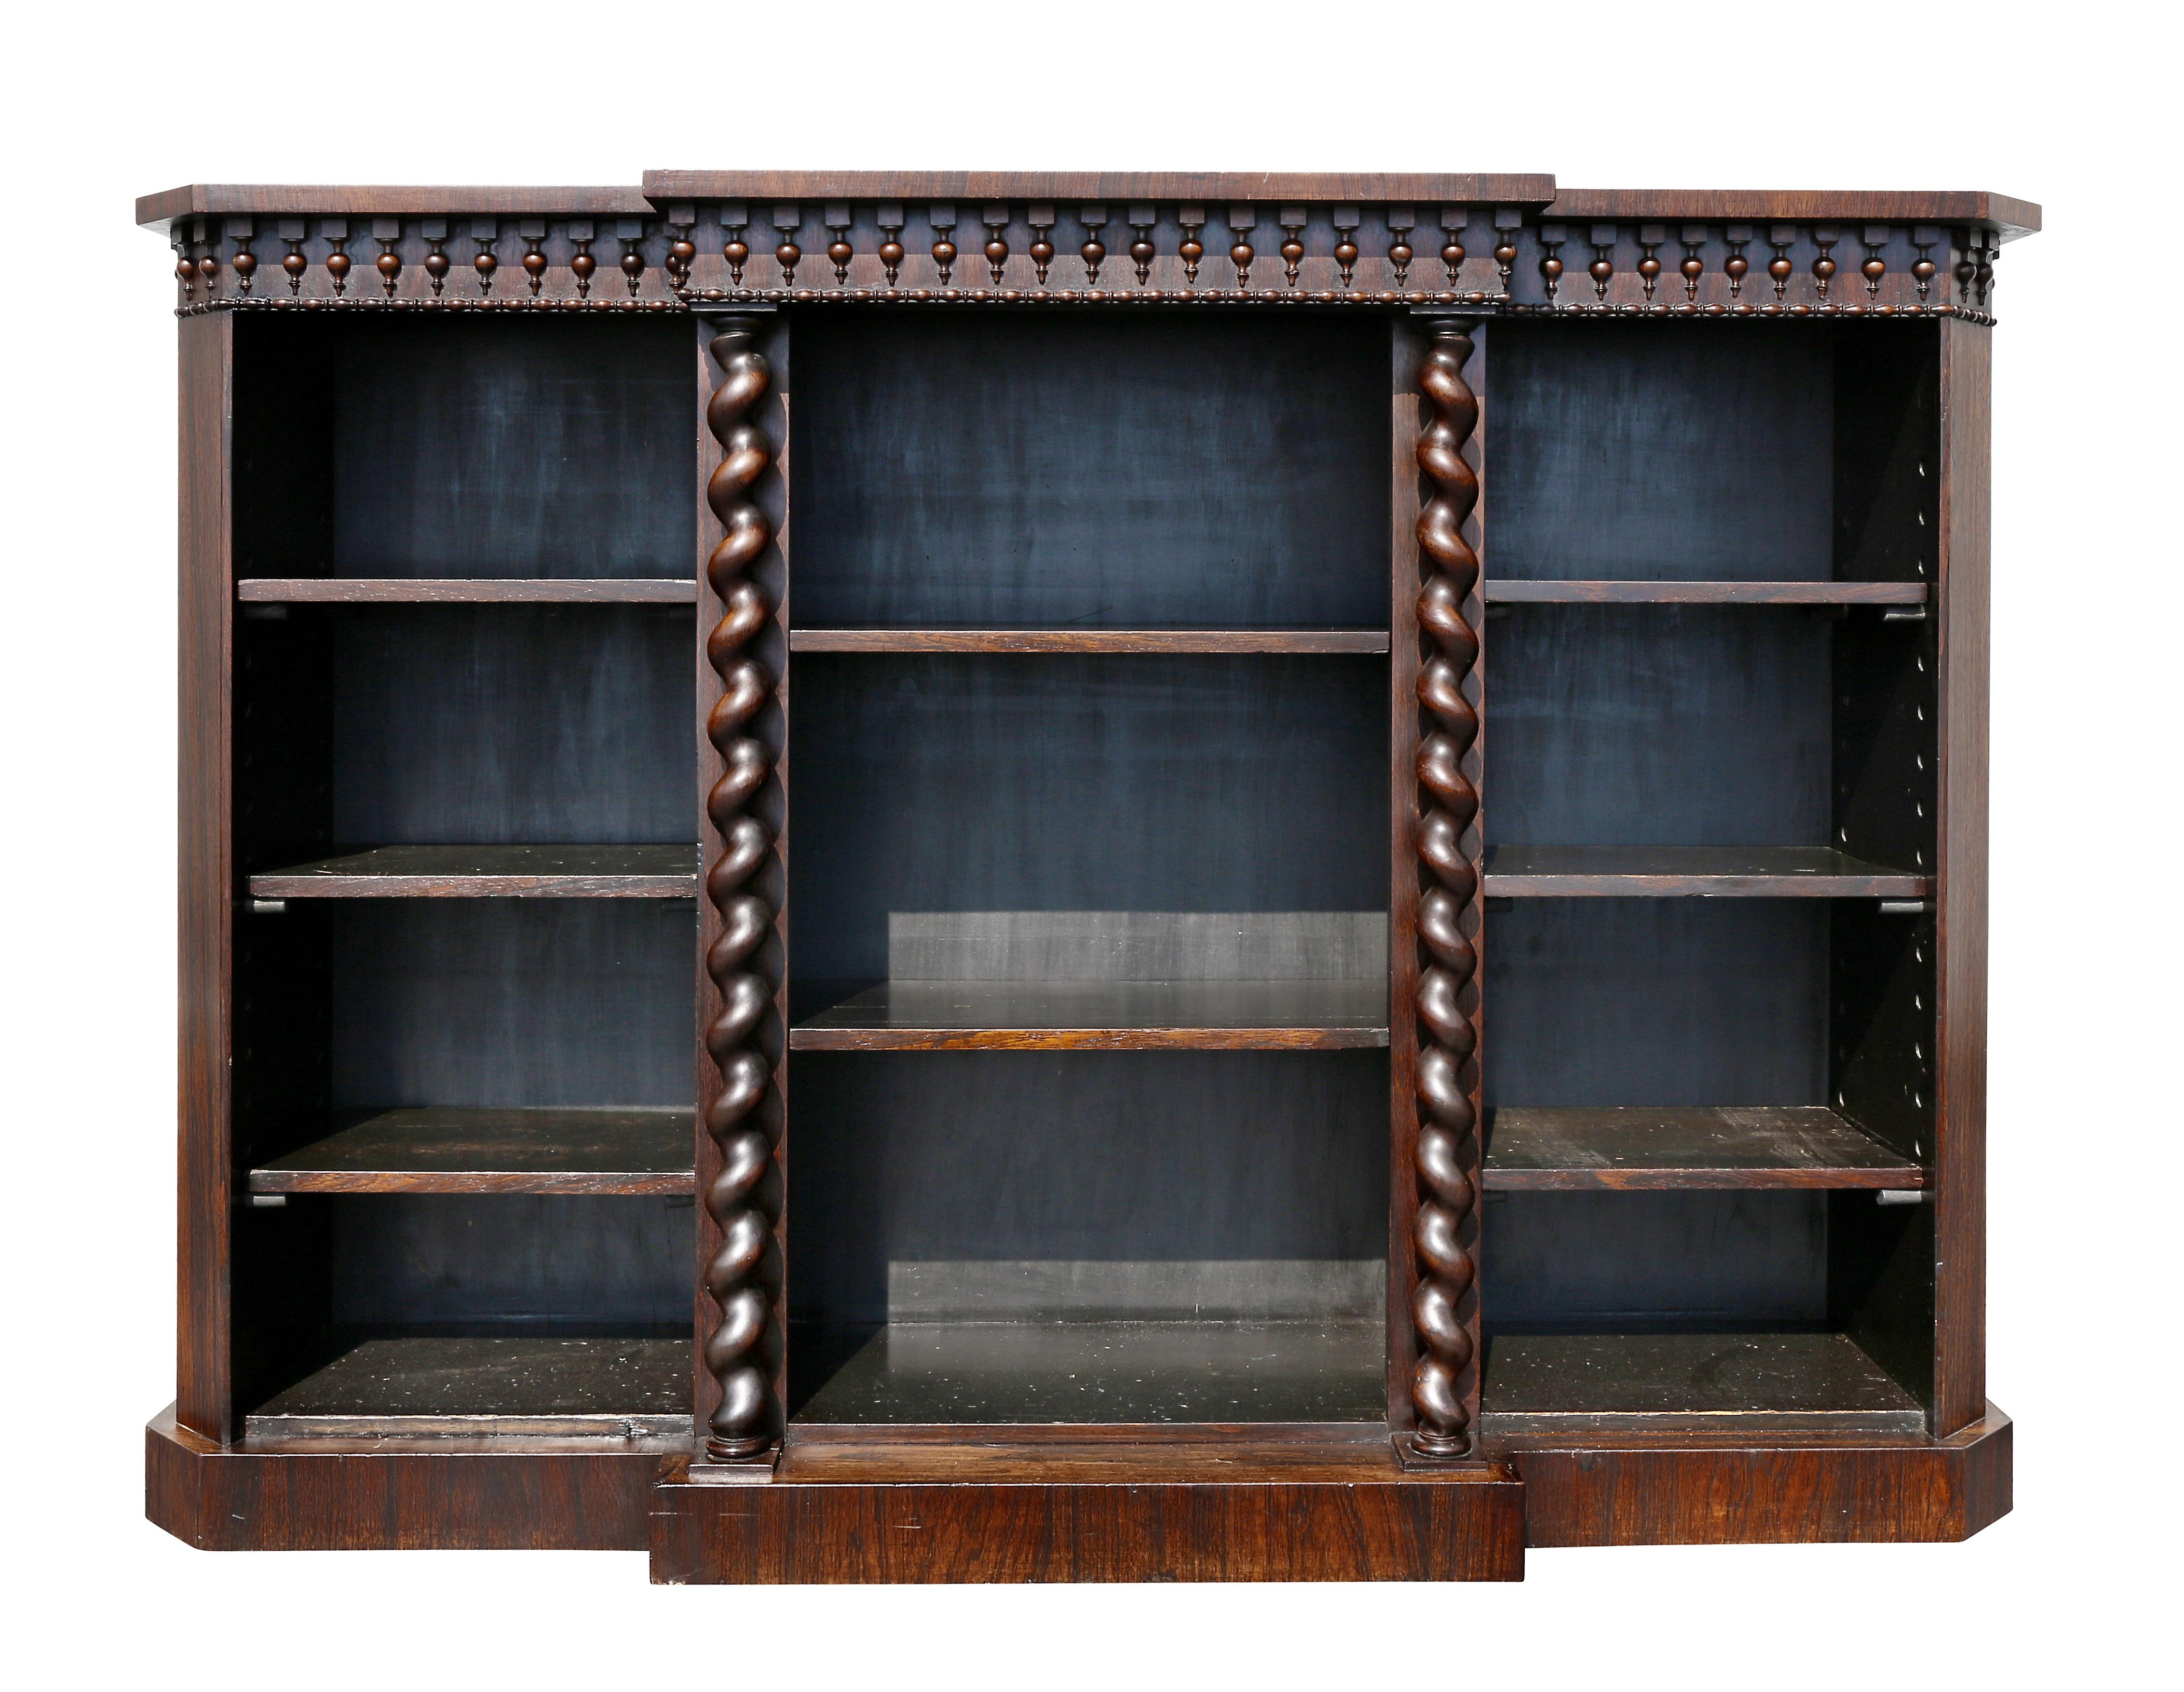 With rectangular breakfront form top over a frieze with bead and reel and pendant carving over a three-section bookcase with central barley twist columns. Adjustable shelves. Plinth base.